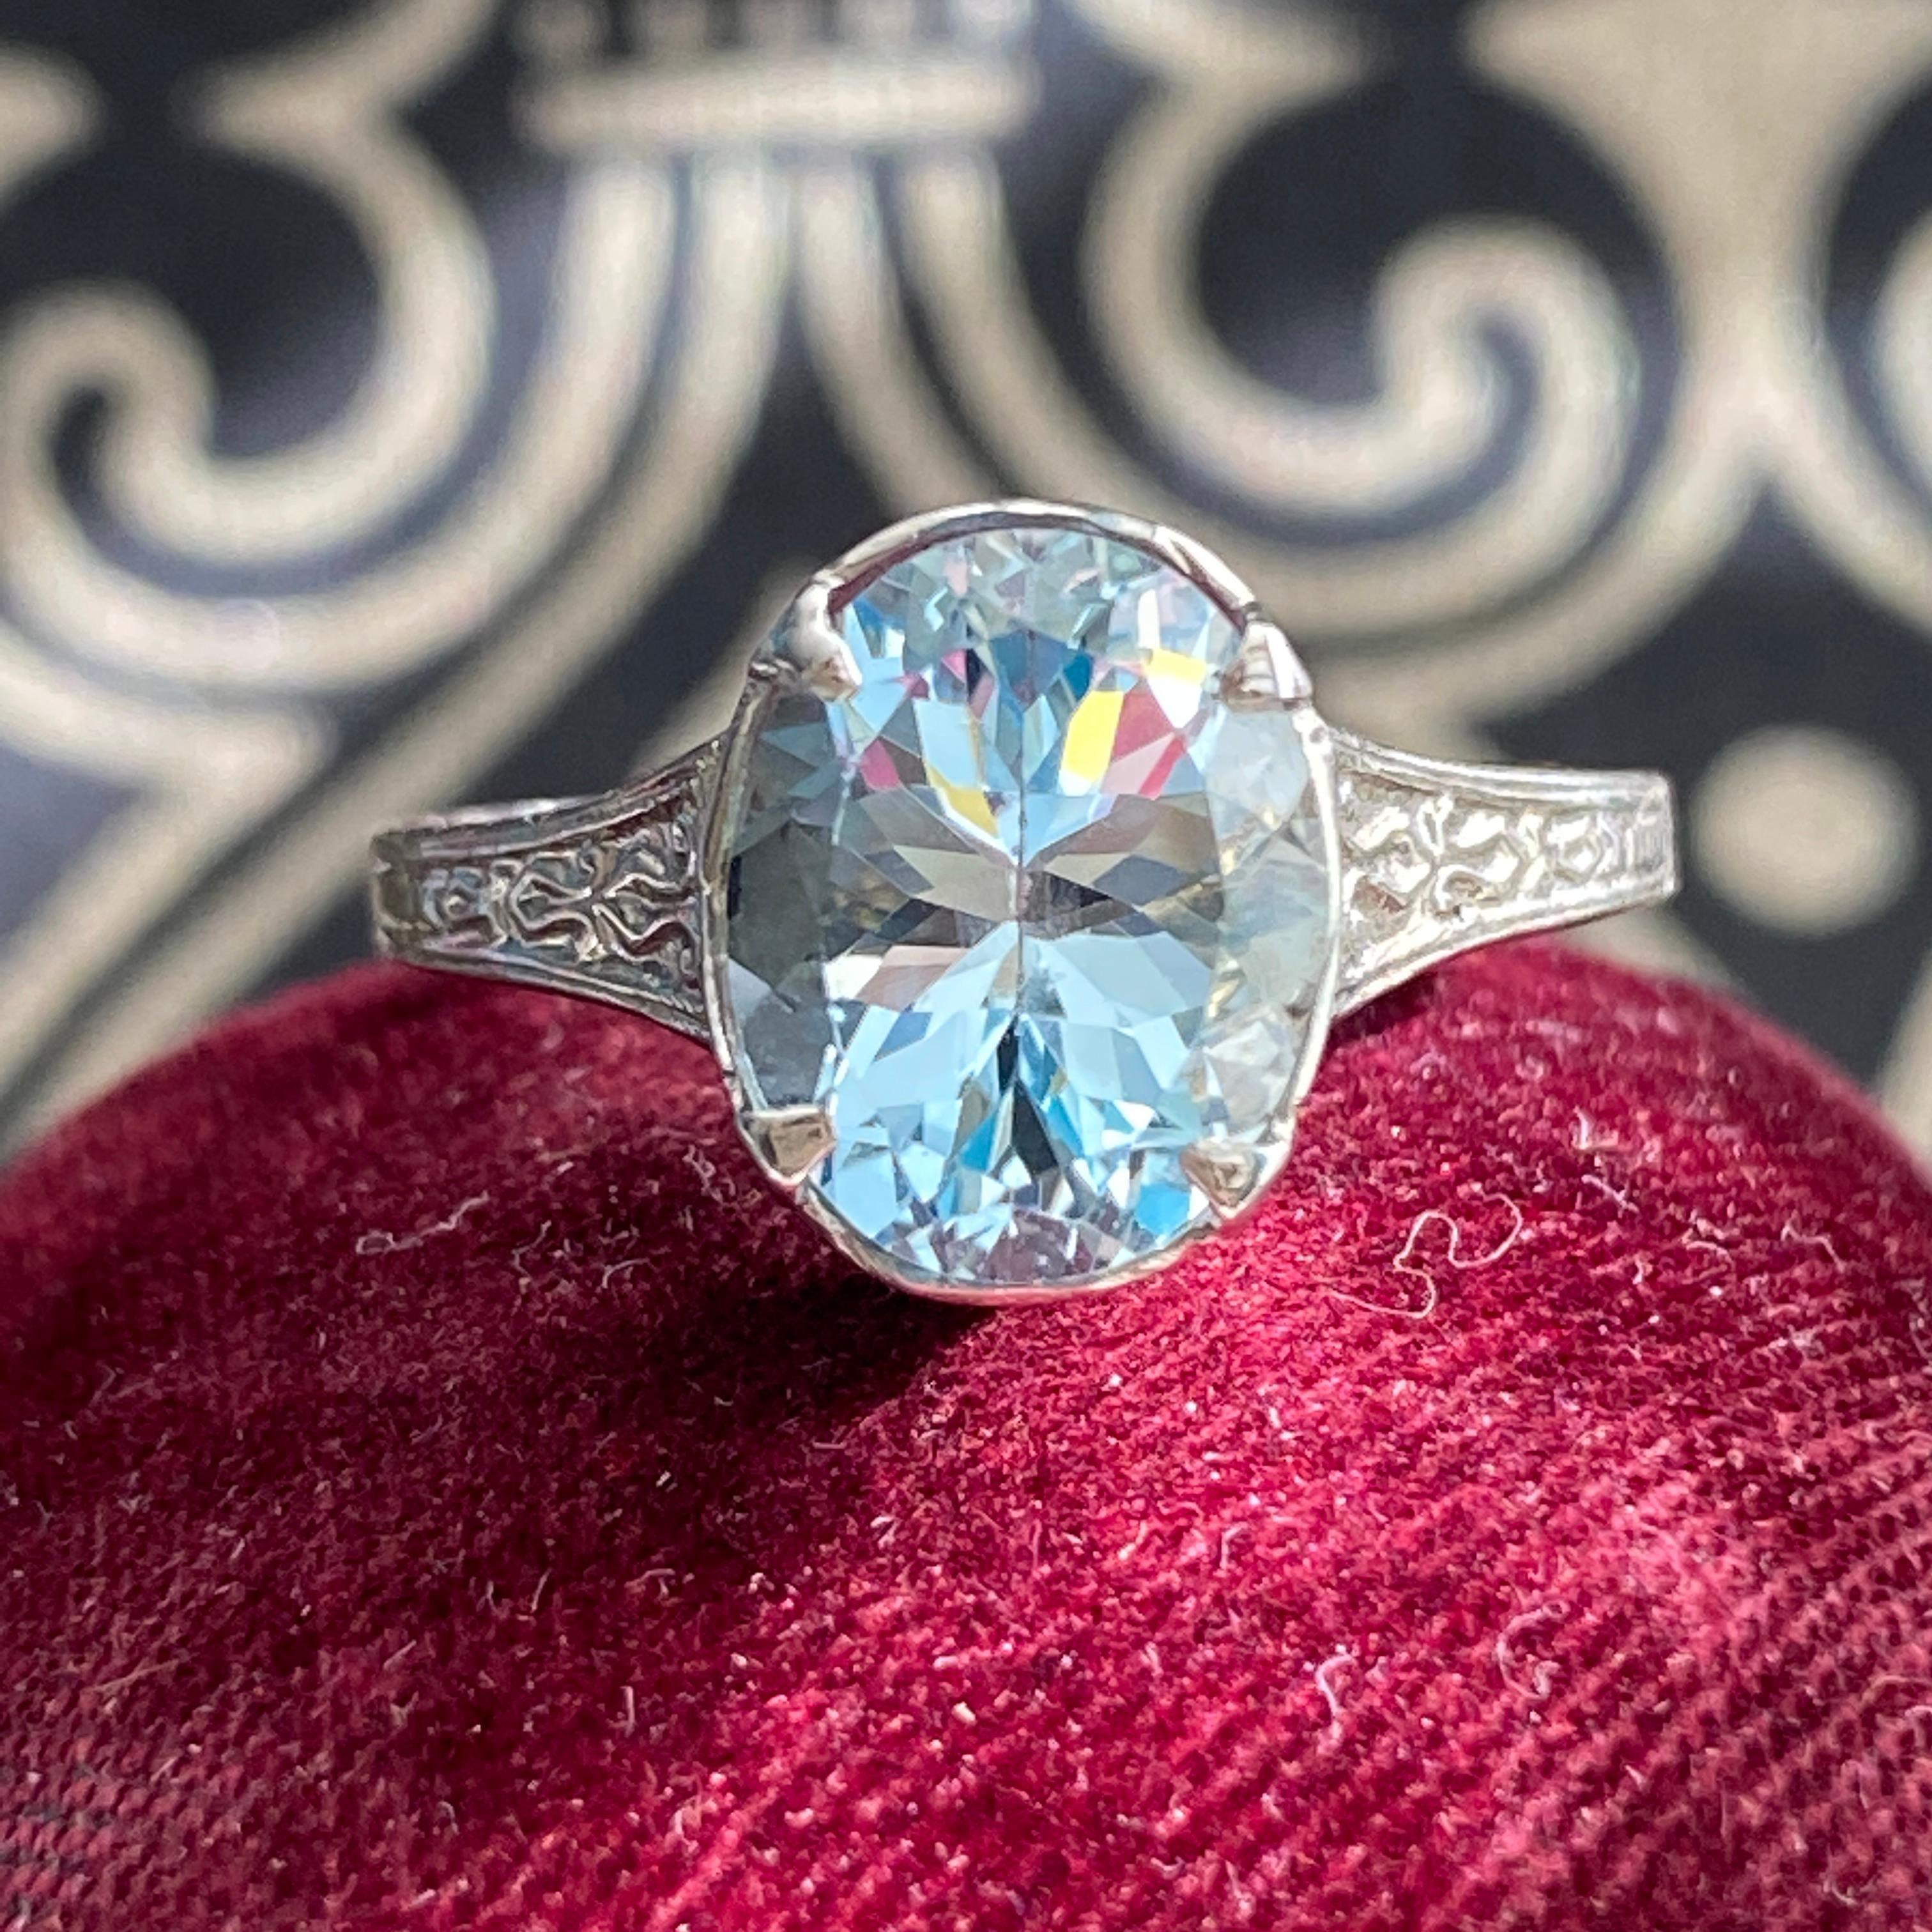 Details: 
Sweet vintage Aquamarine 10K white gold filigree ring. The ring has a sweet filigree pattern surrounding the stone with an engraved band. The aquamarine measures 9mm x 7mm. The ring is stamped 10K on the inside of the band.